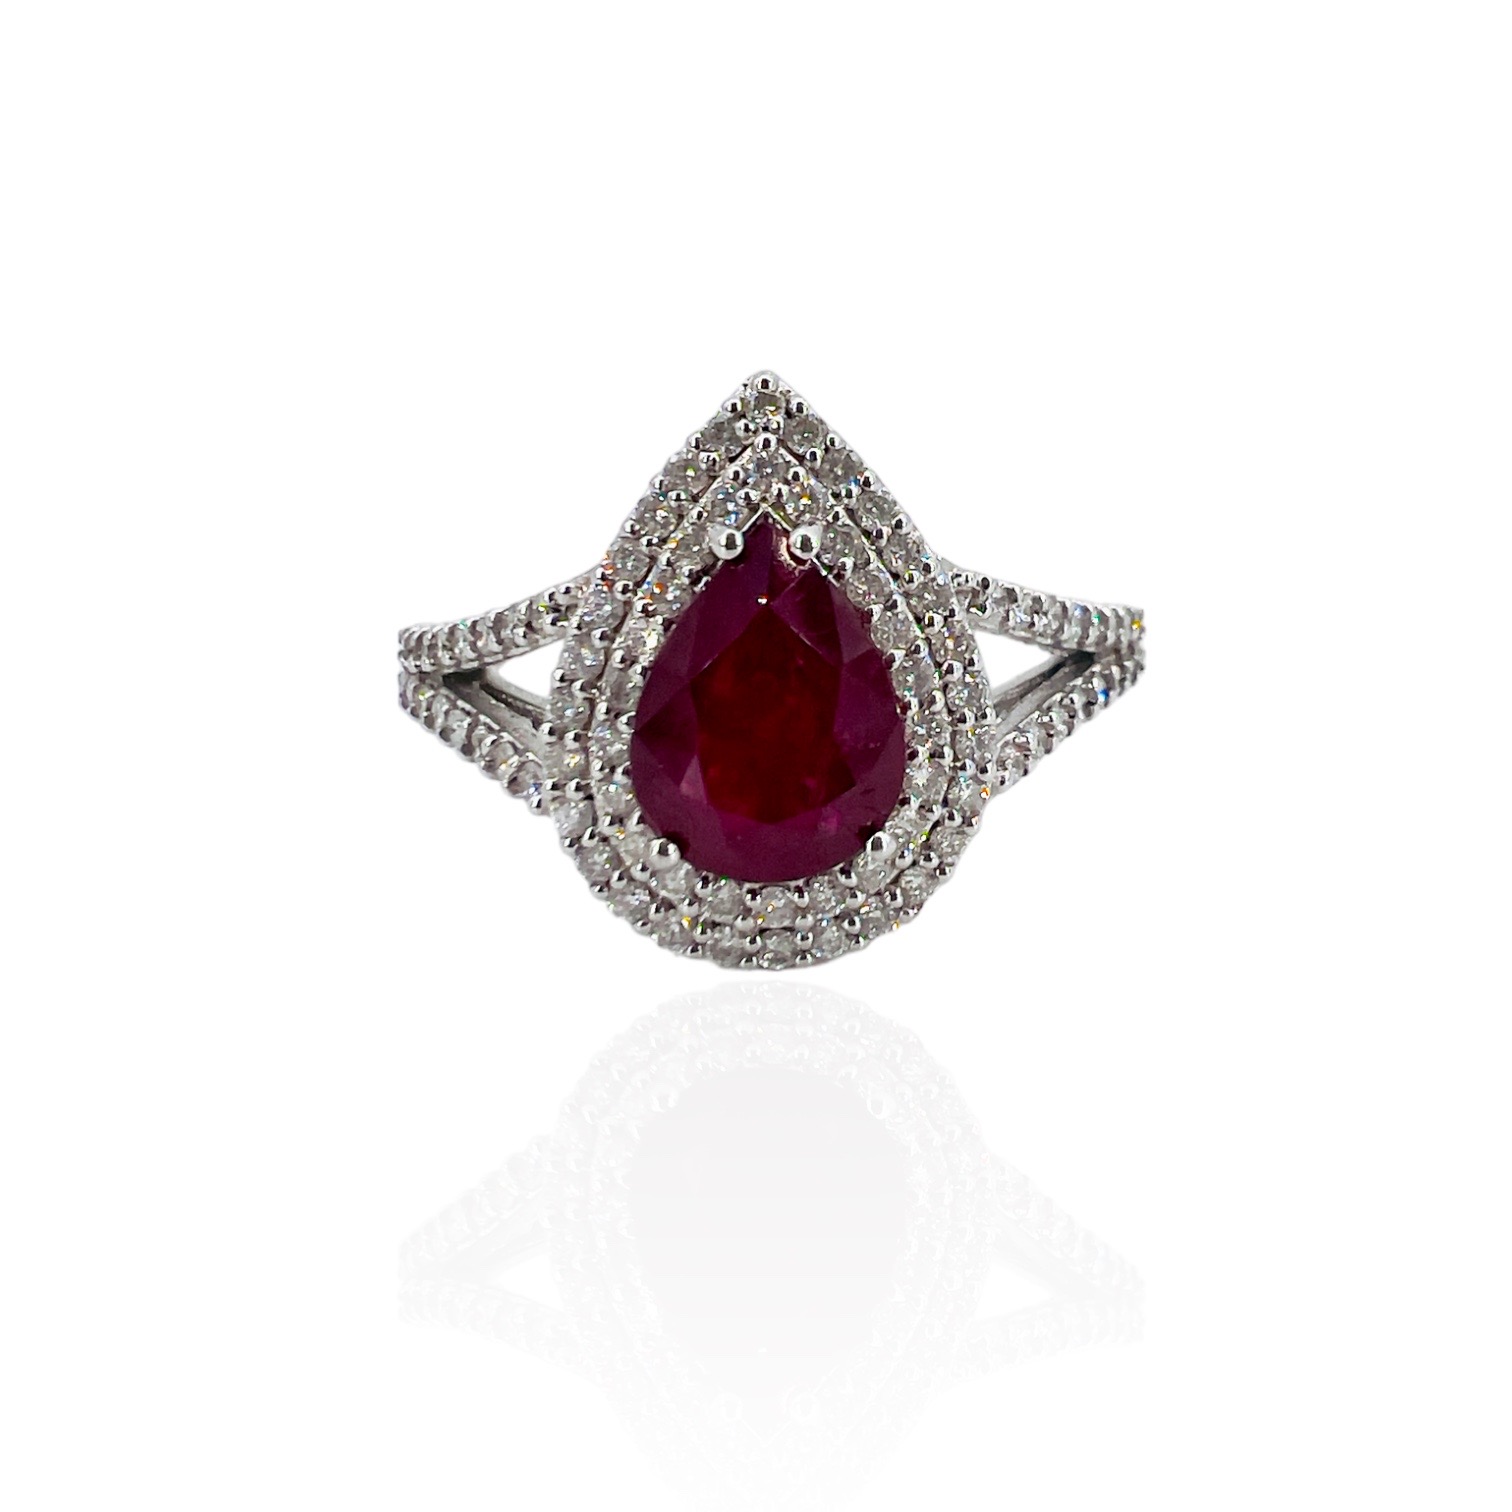 Ruby ring diamonds and gold Belle Epoque Art. AN743